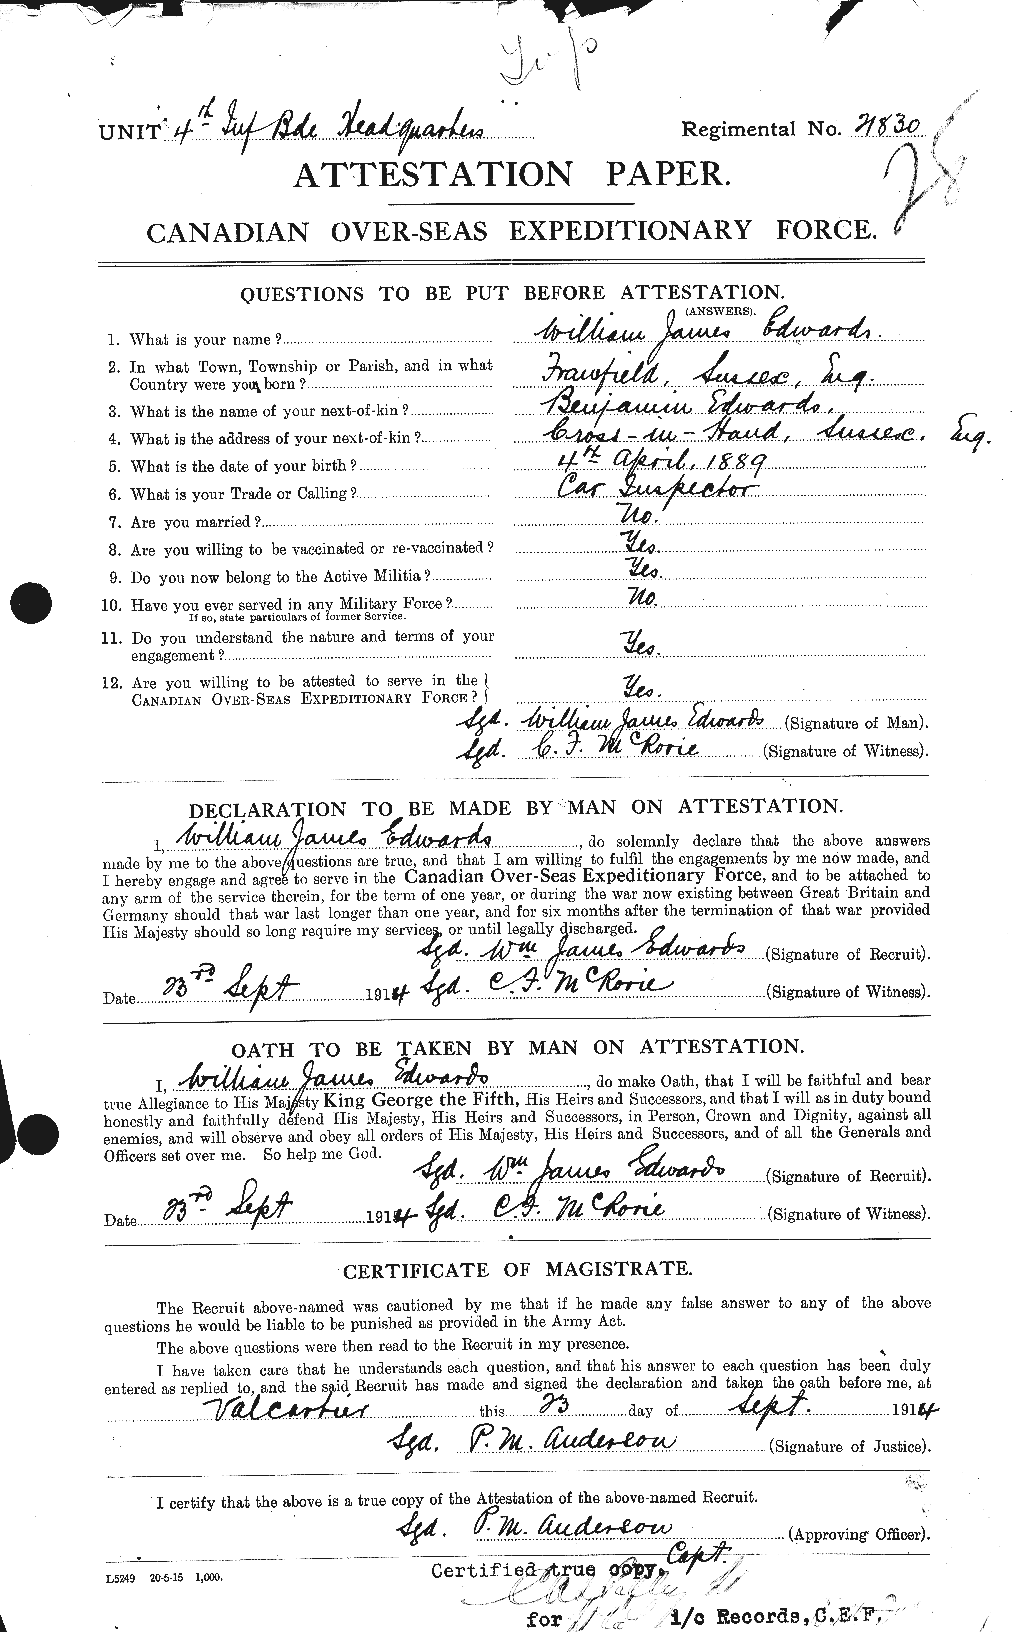 Personnel Records of the First World War - CEF 311919a